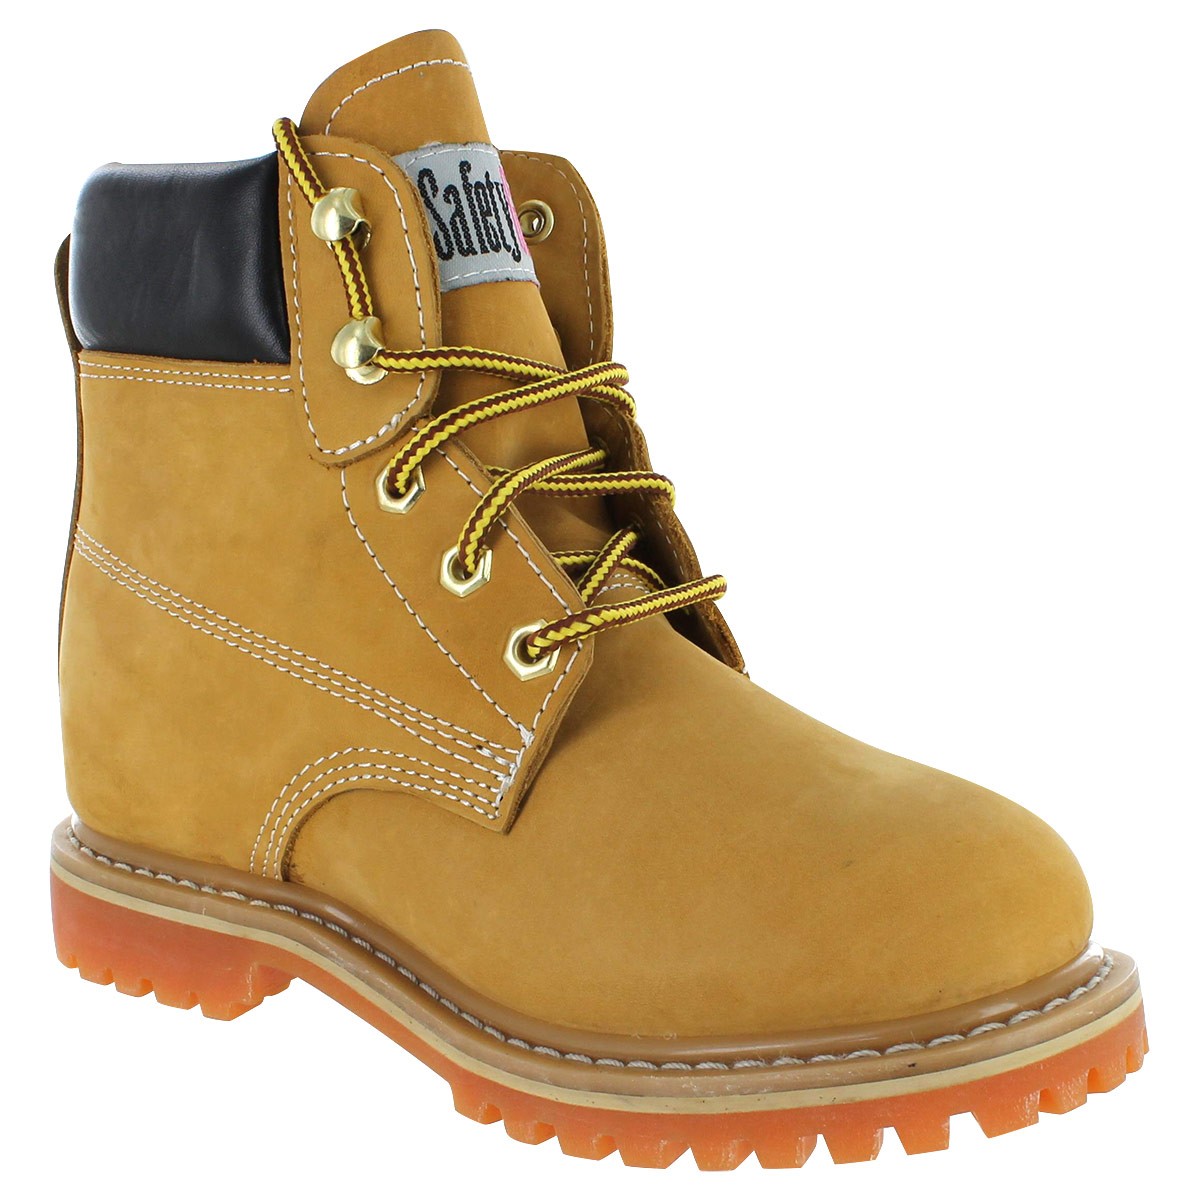 work boots for women safety girl ii sheepskin lined work boots - tan FSRXAPO